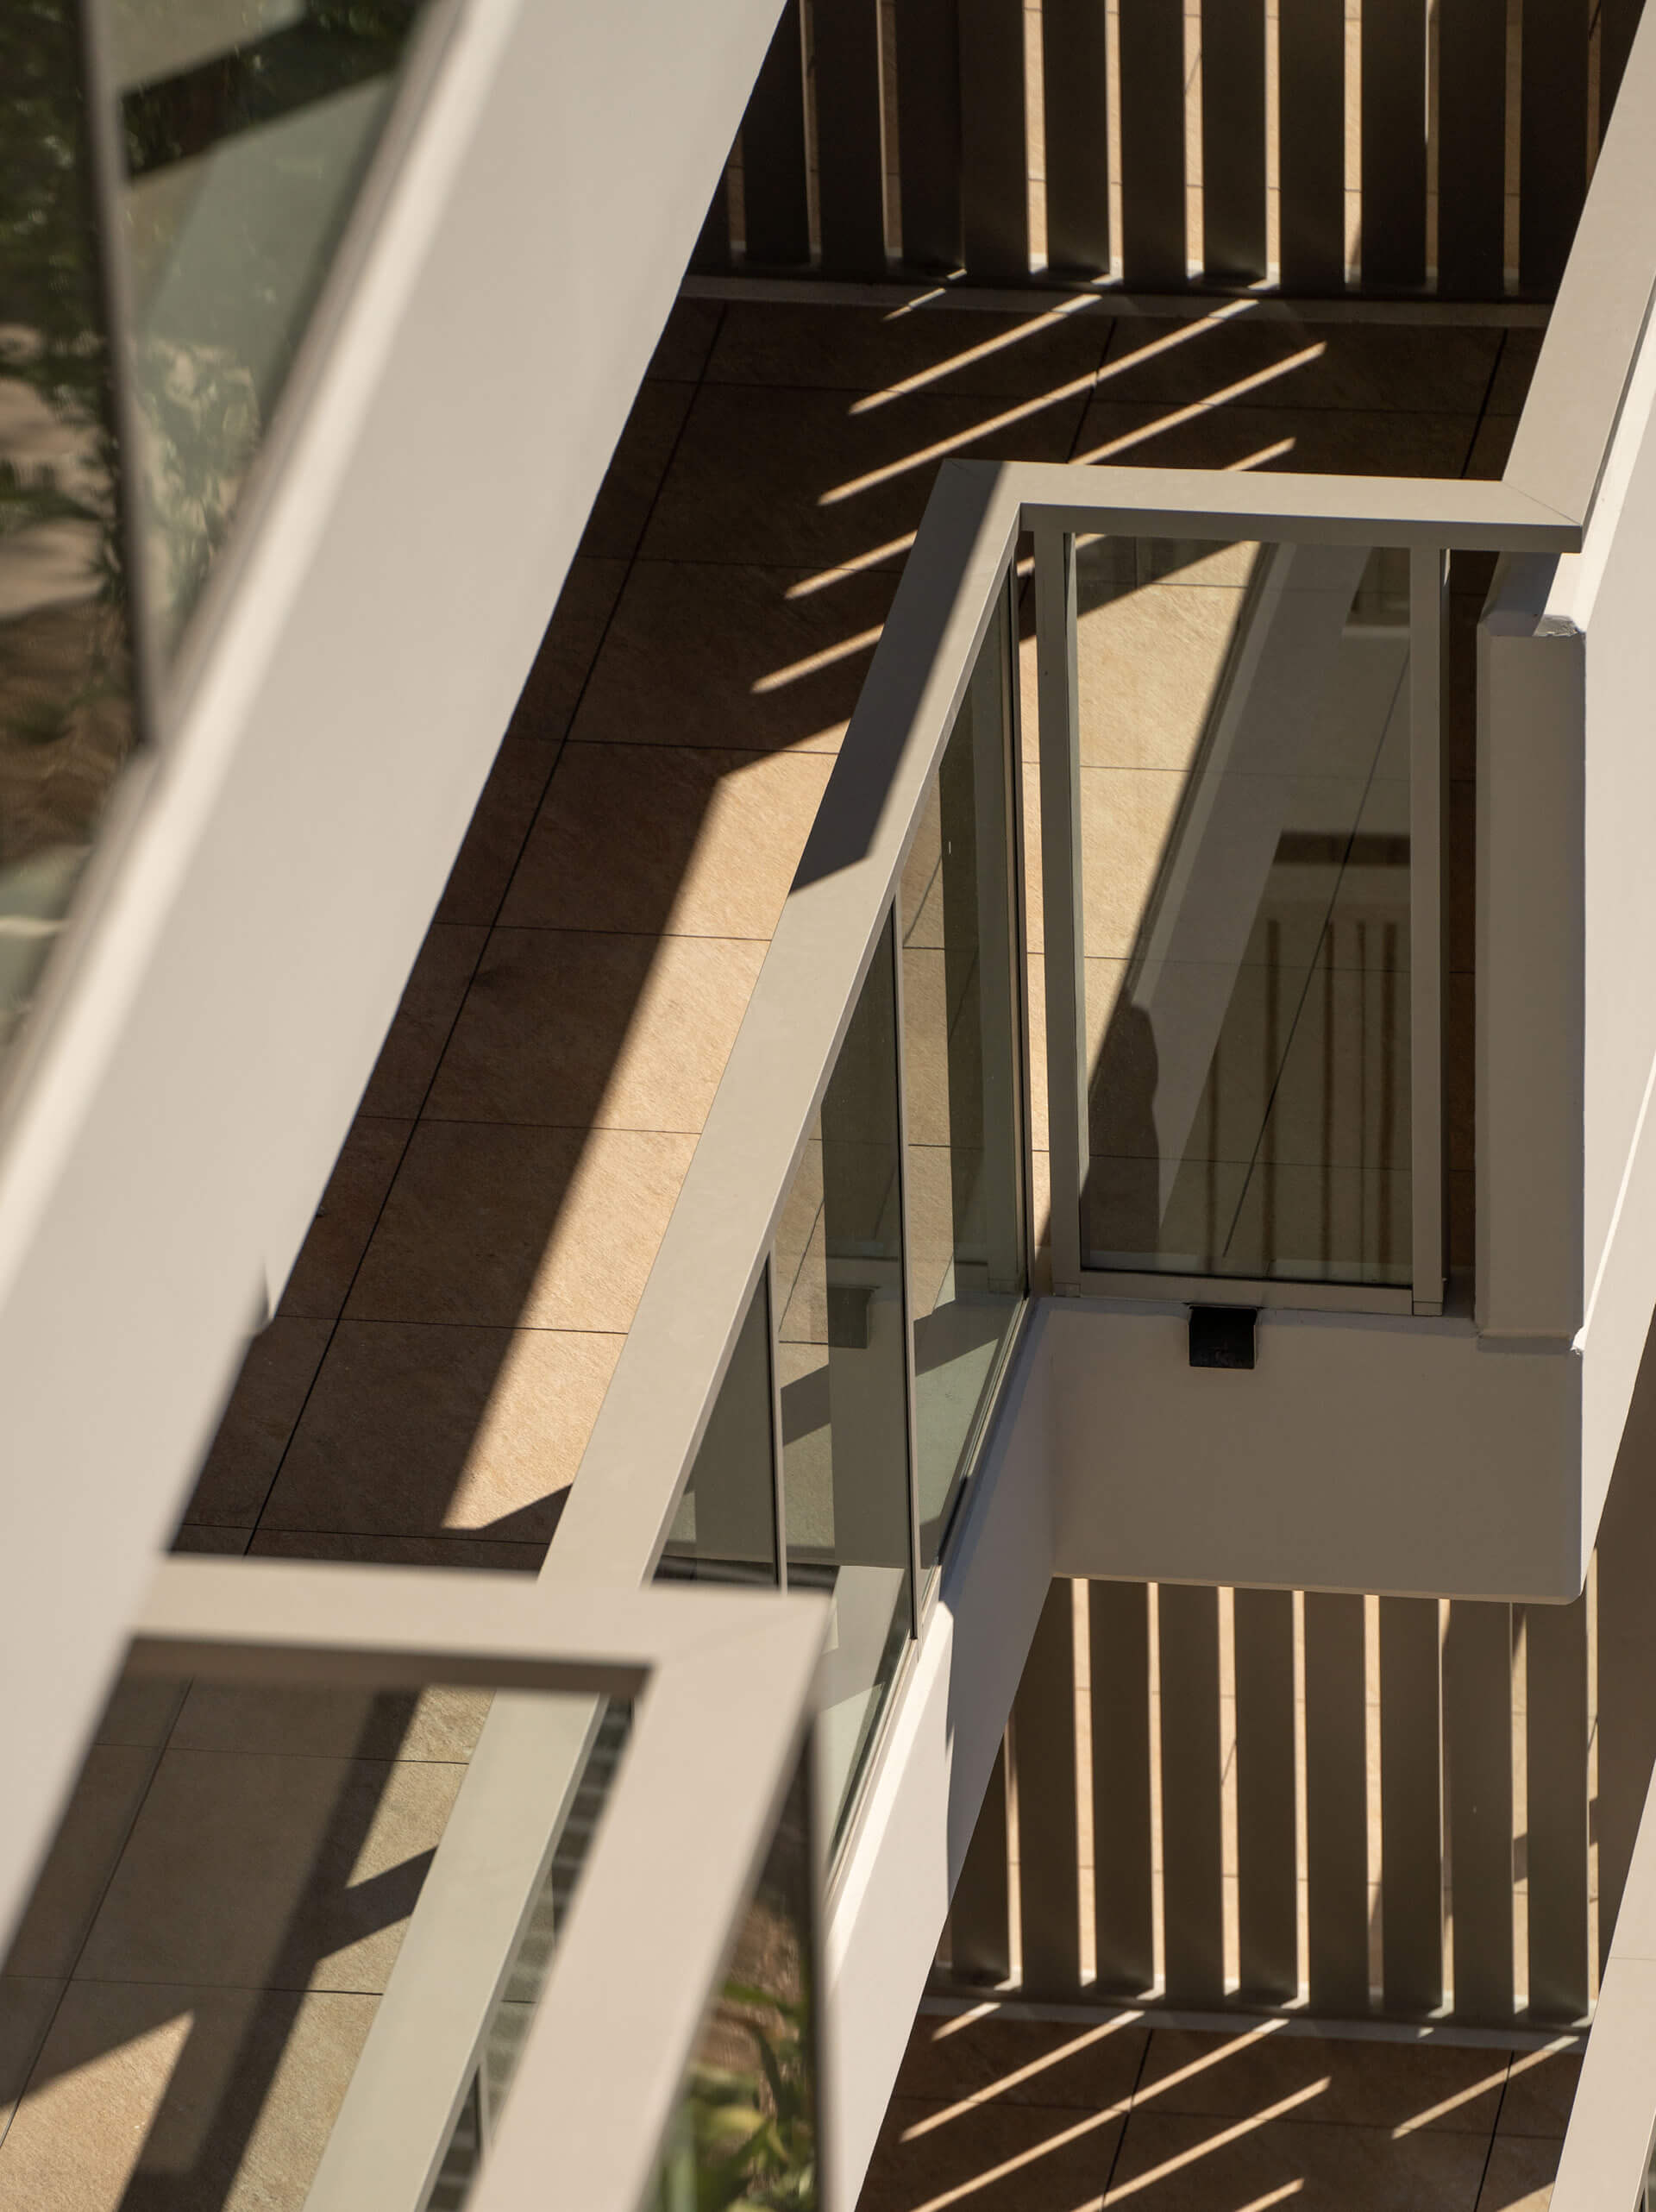 20 exterior close up balcony uniting bowden brae stage 2 taylor construction education